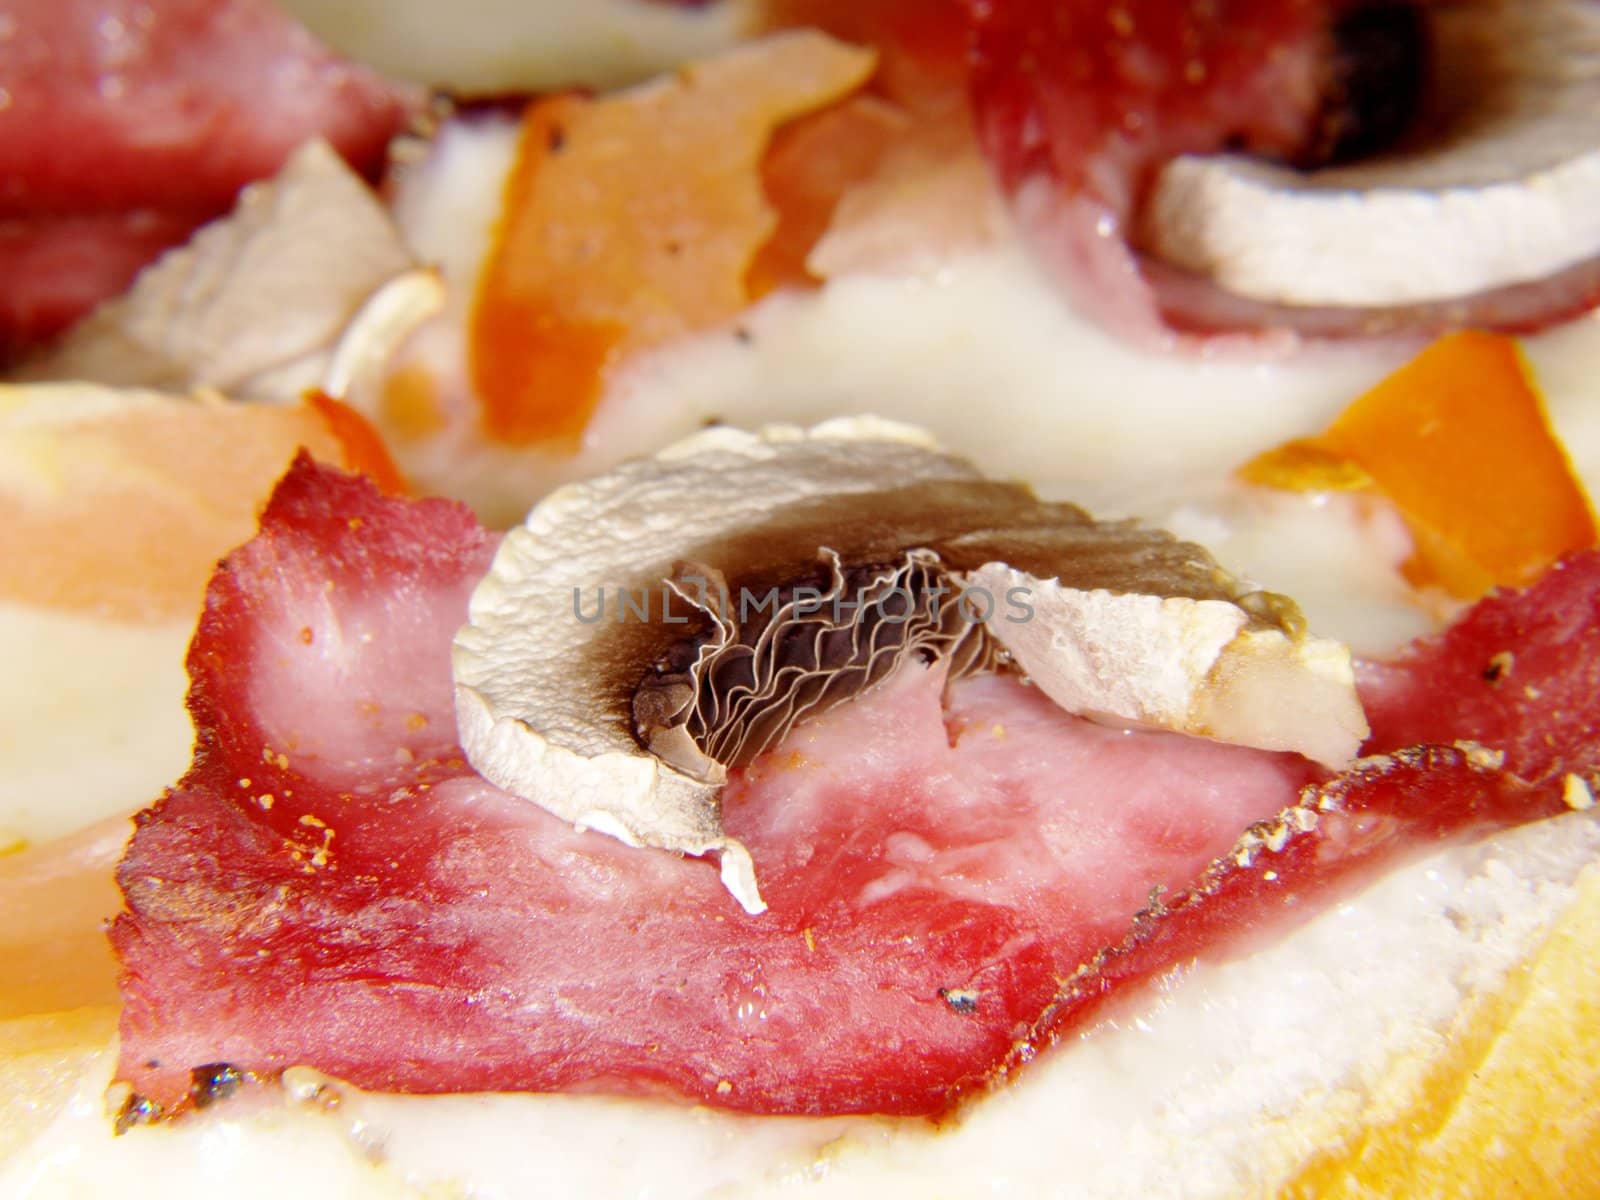 Sliced champignon on top of piece of ham and melted cheese